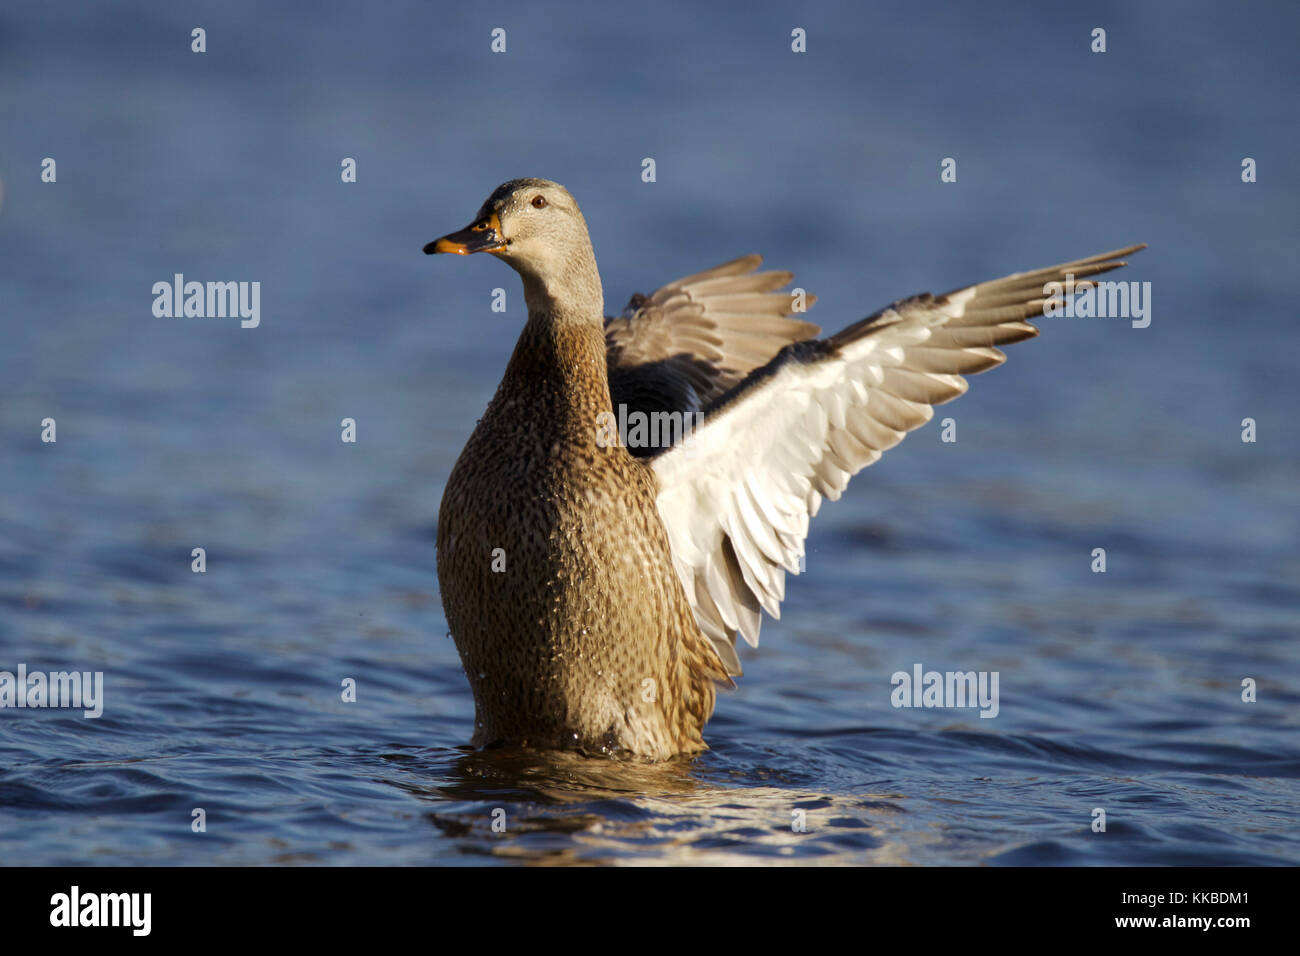 A female mallard duck Anas platyrhynchos flapping her wings on a blue lake Stock Photo